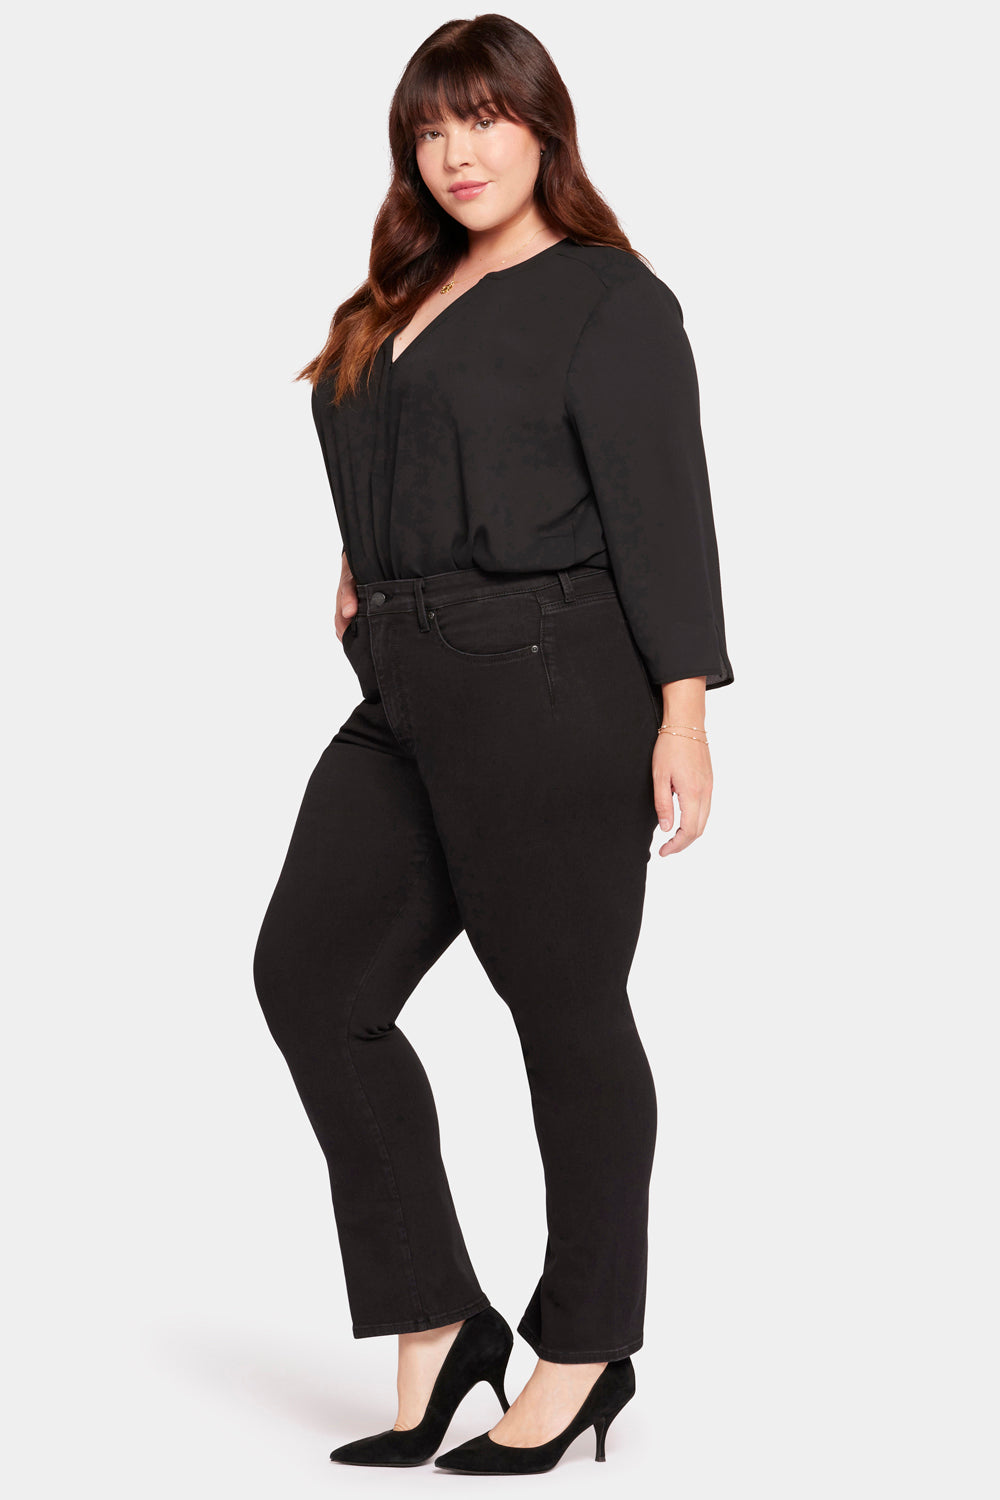 NYDJ Le Silhouette Slim Bootcut Jeans In Petite Plus Size With High Rise - Stellar